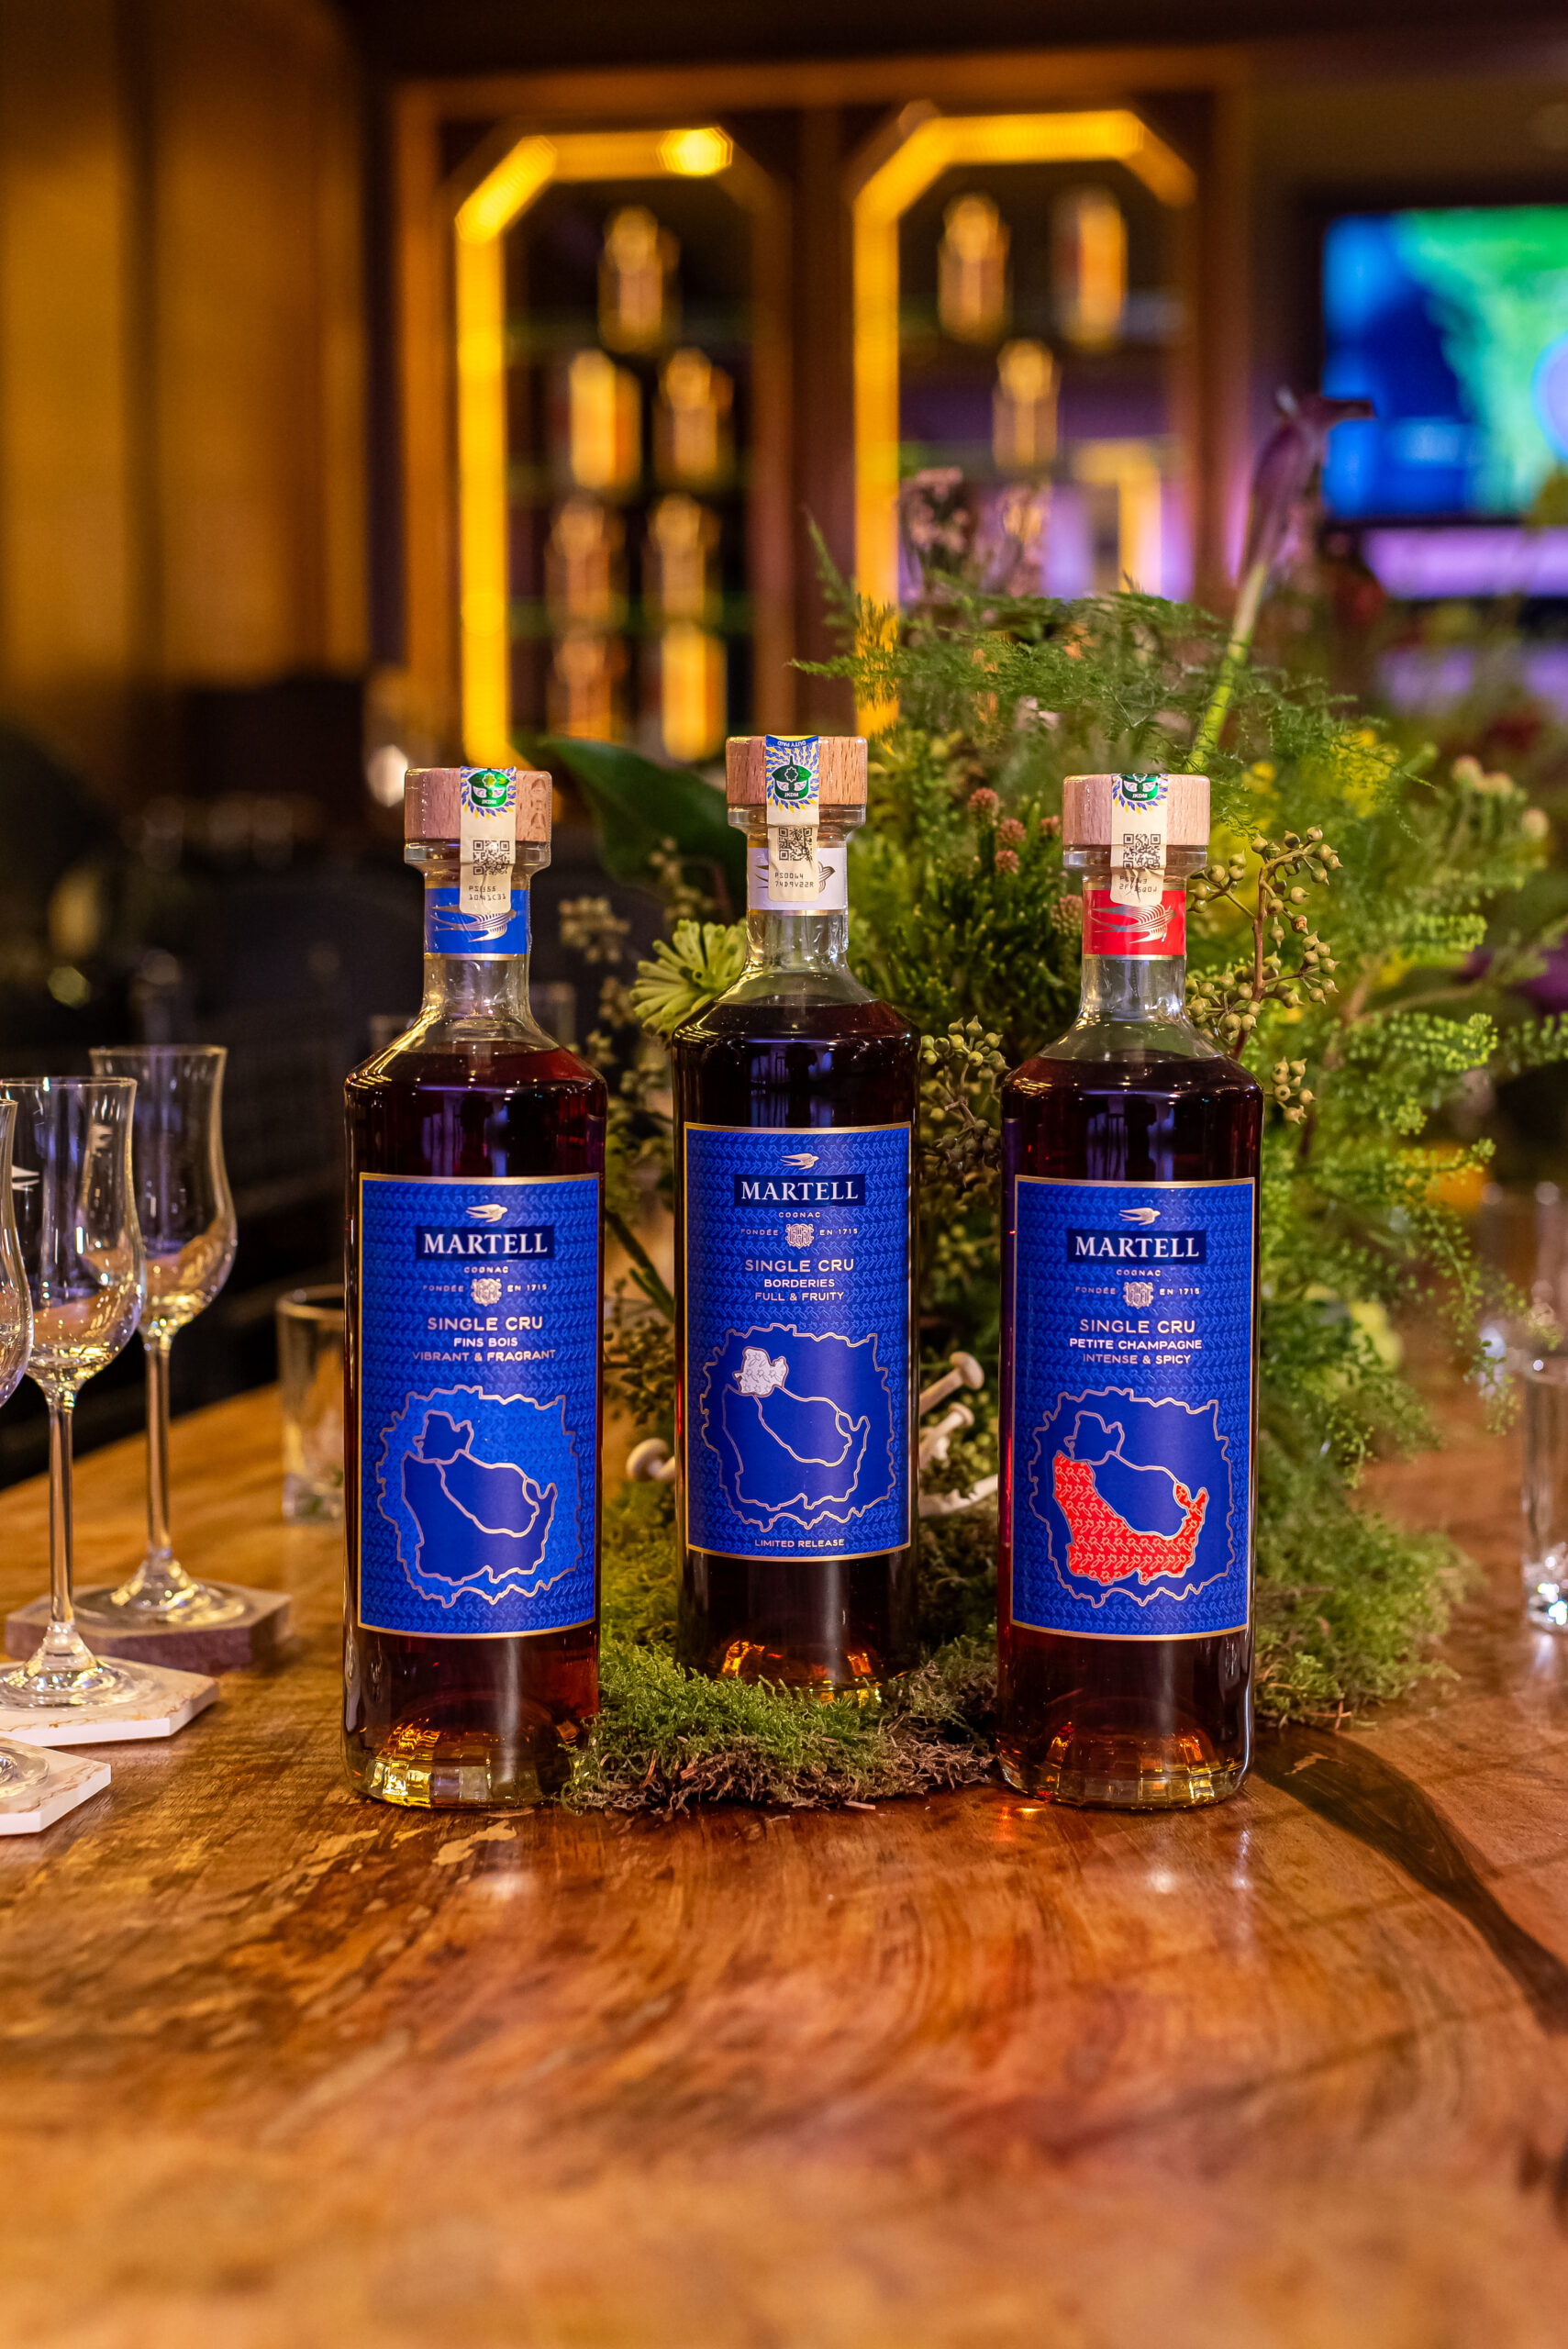 Martell single cru launch - discovery edition